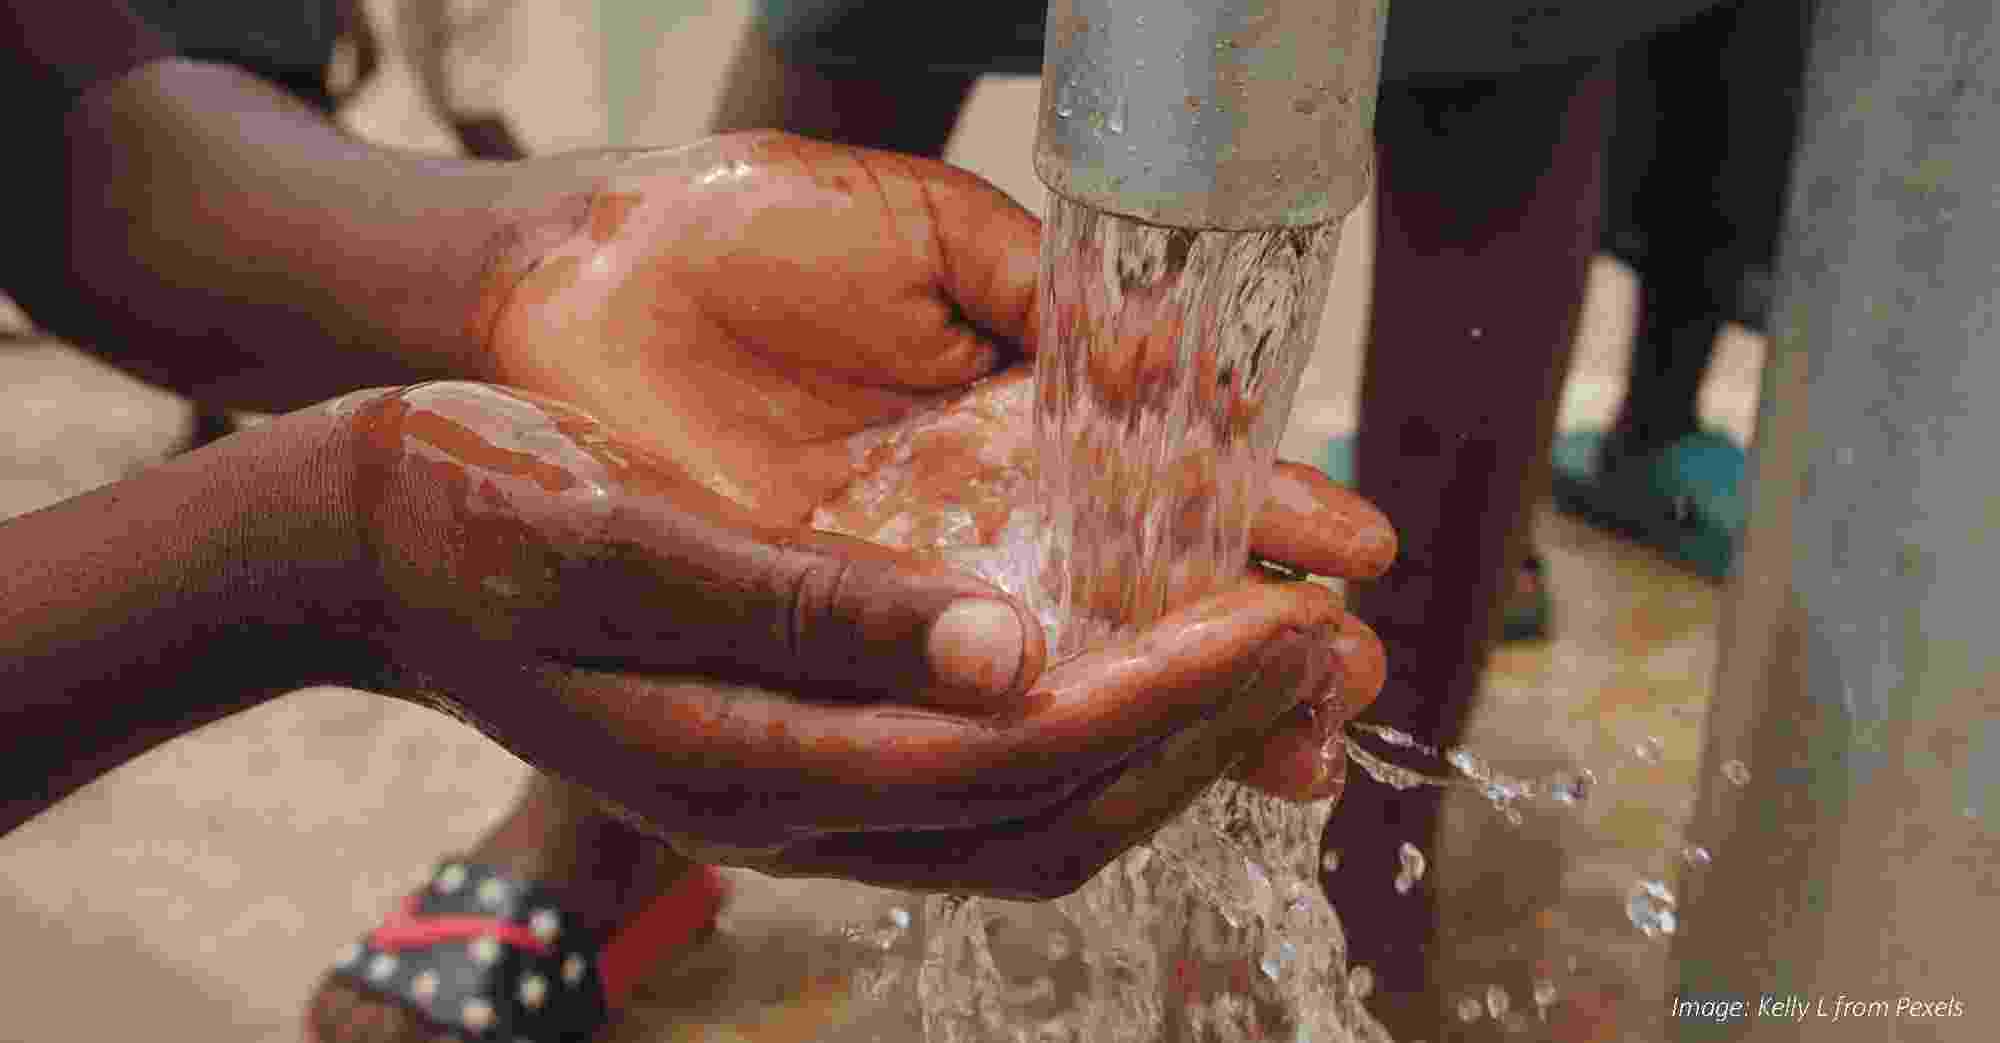 Photograph of a child's hands underneath a running outdoor tap